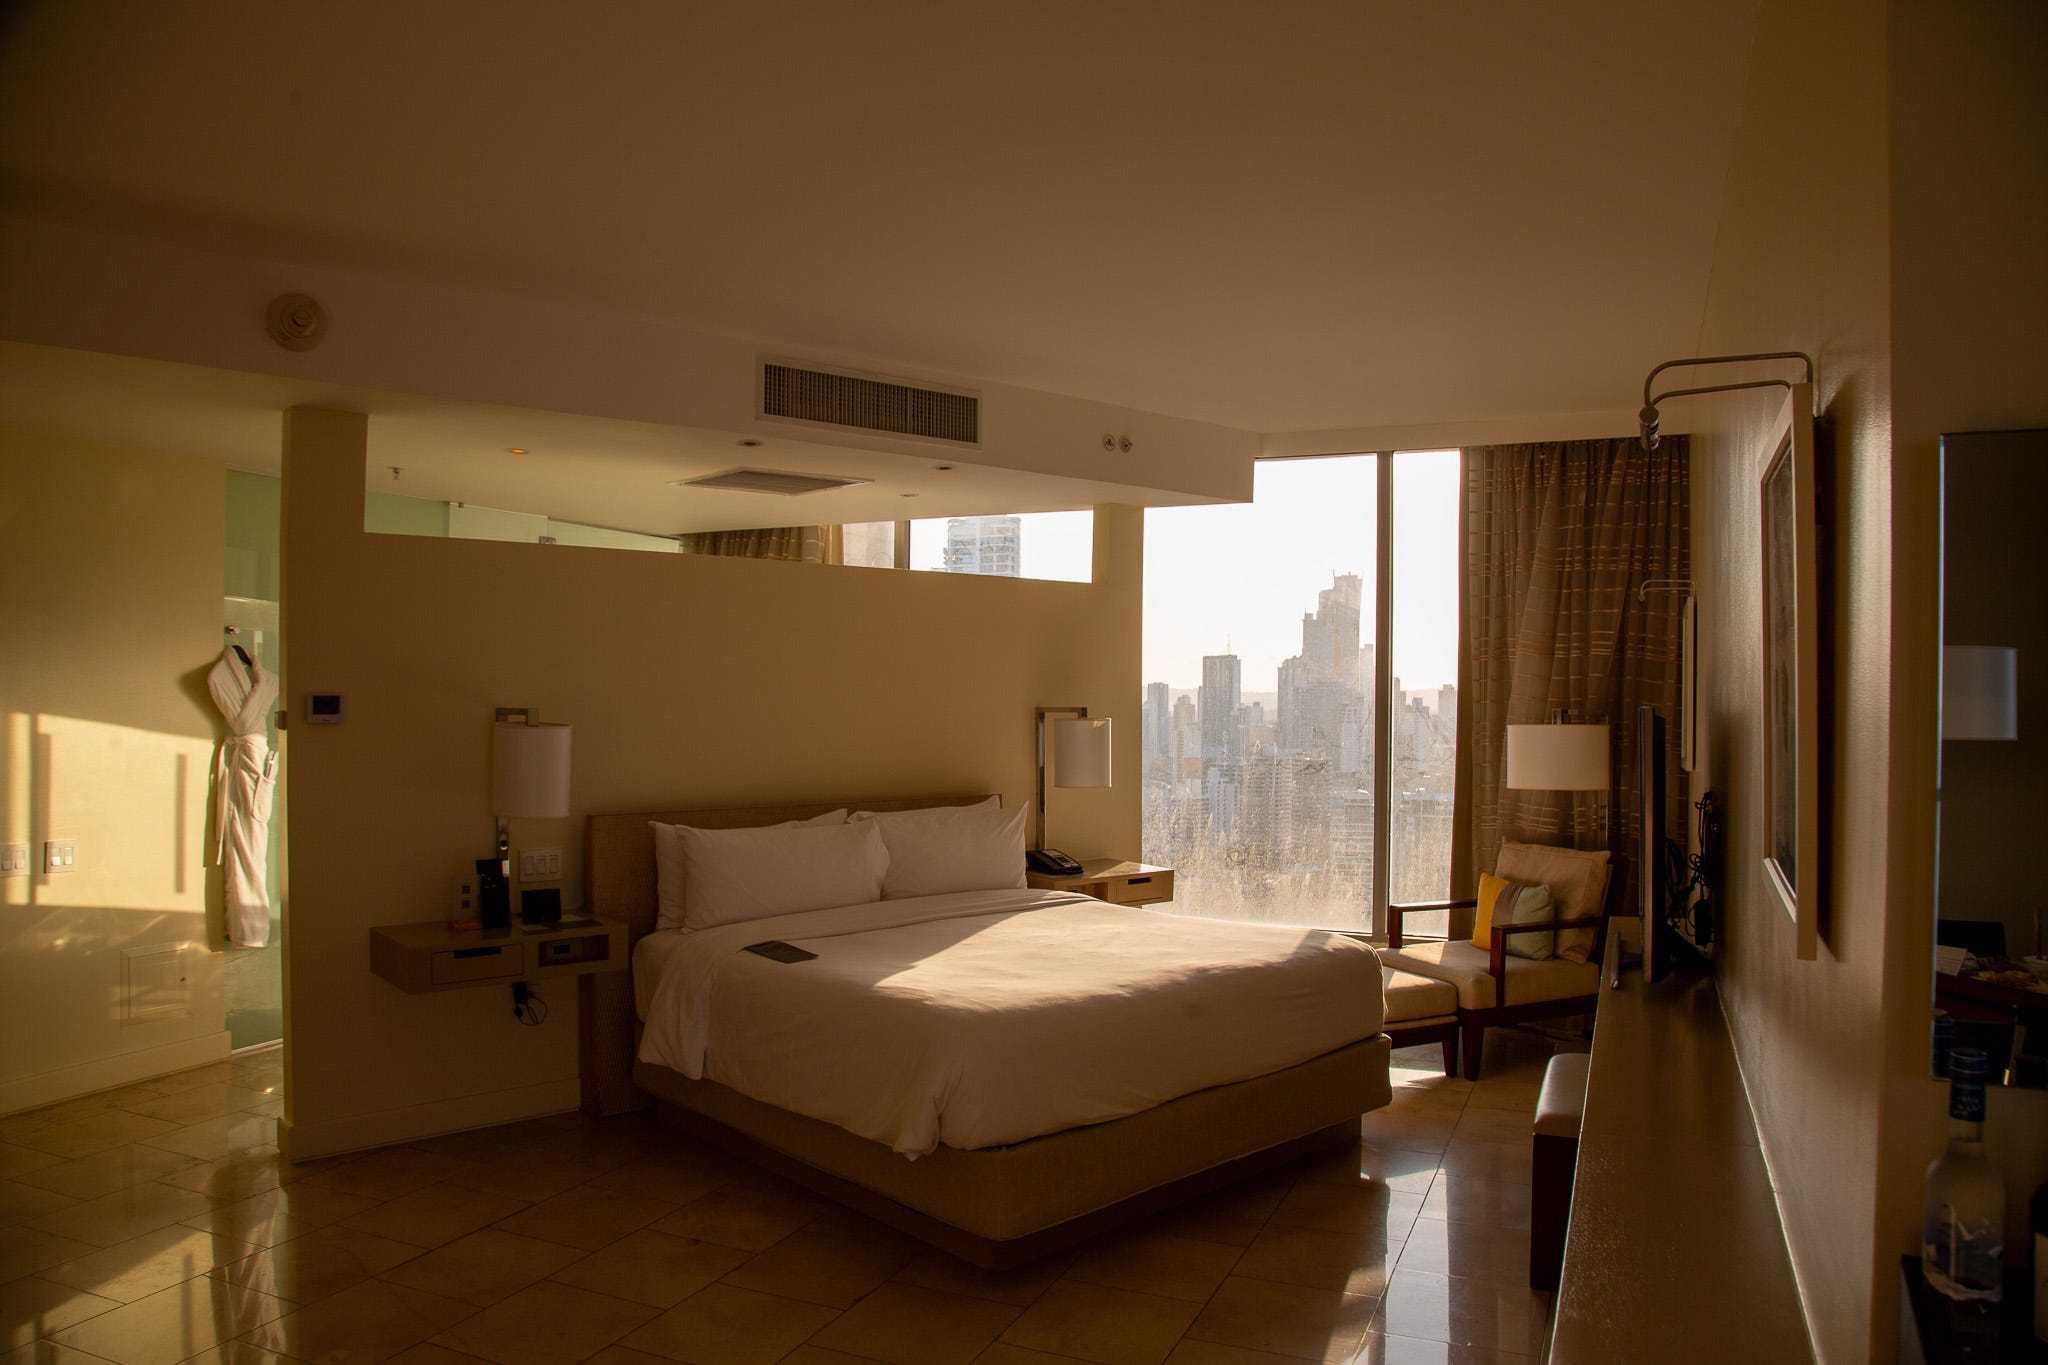 <p>A night at the JW Marriott felt like the ideal way to experience Panama's richest neighborhood. So, at 4 p.m., I arrived at the skyscraper and headed to the hotel's lobby on floor 16.</p><p>I received a key to my suite and headed to floor 31. Golden light cast across the room as I stepped inside. The suite had an open concept, with a shower and bathtub looking to Panama City's skyline.</p><p>According to TripAdvisor, standard rooms typically cost between $193 and $290 for a night. BI received a media rate for the room.</p>